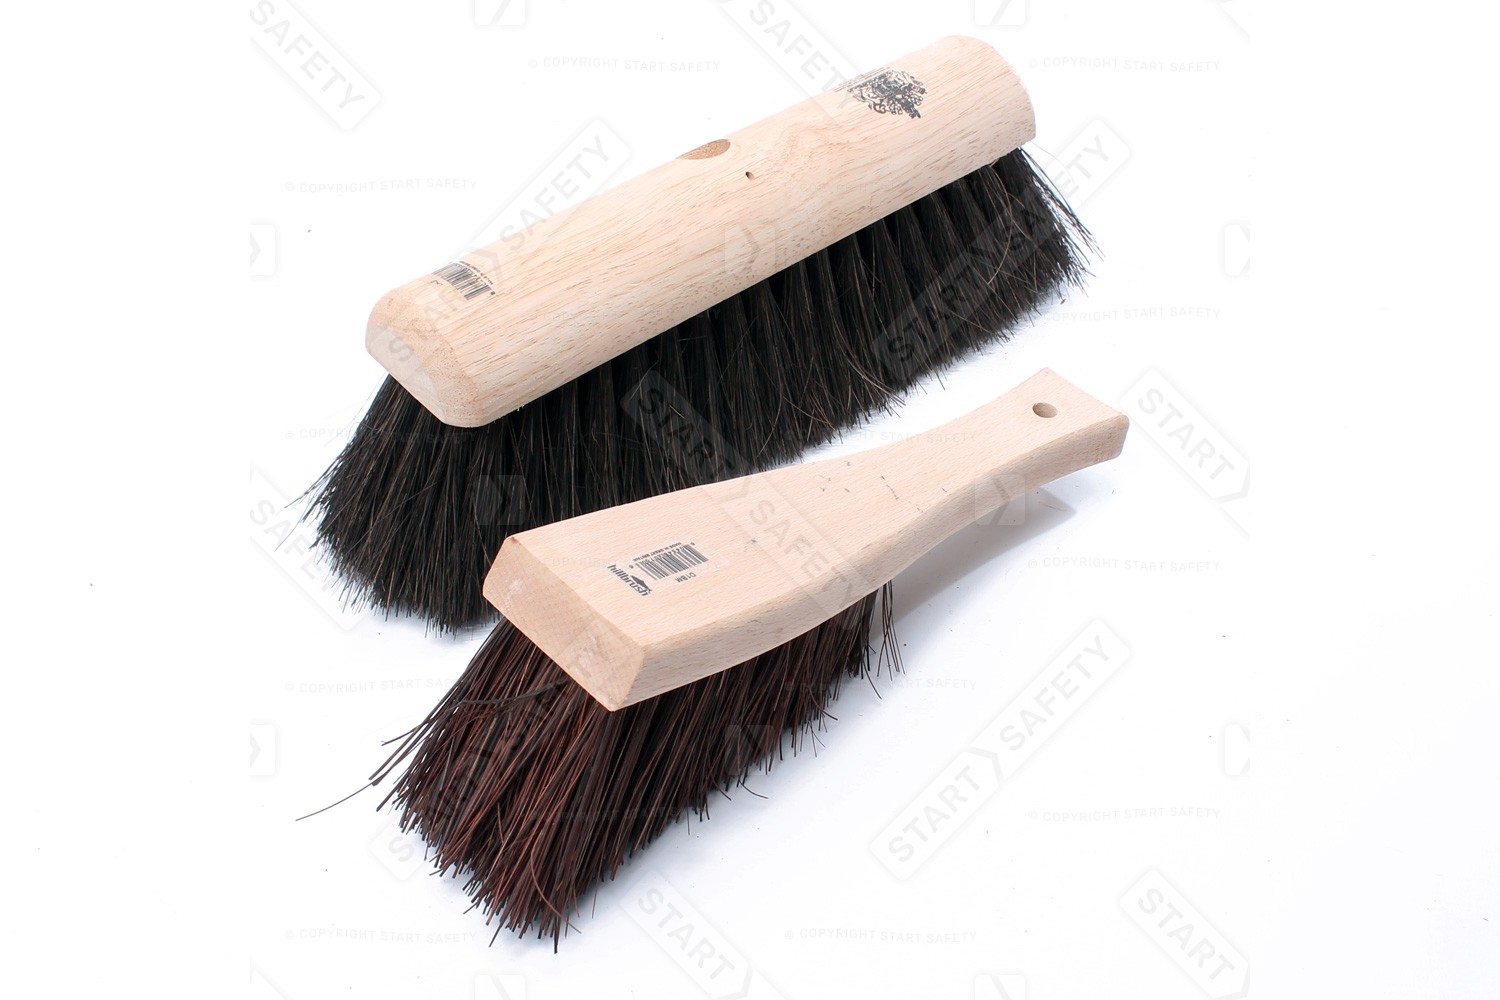 Difference between broom and brush